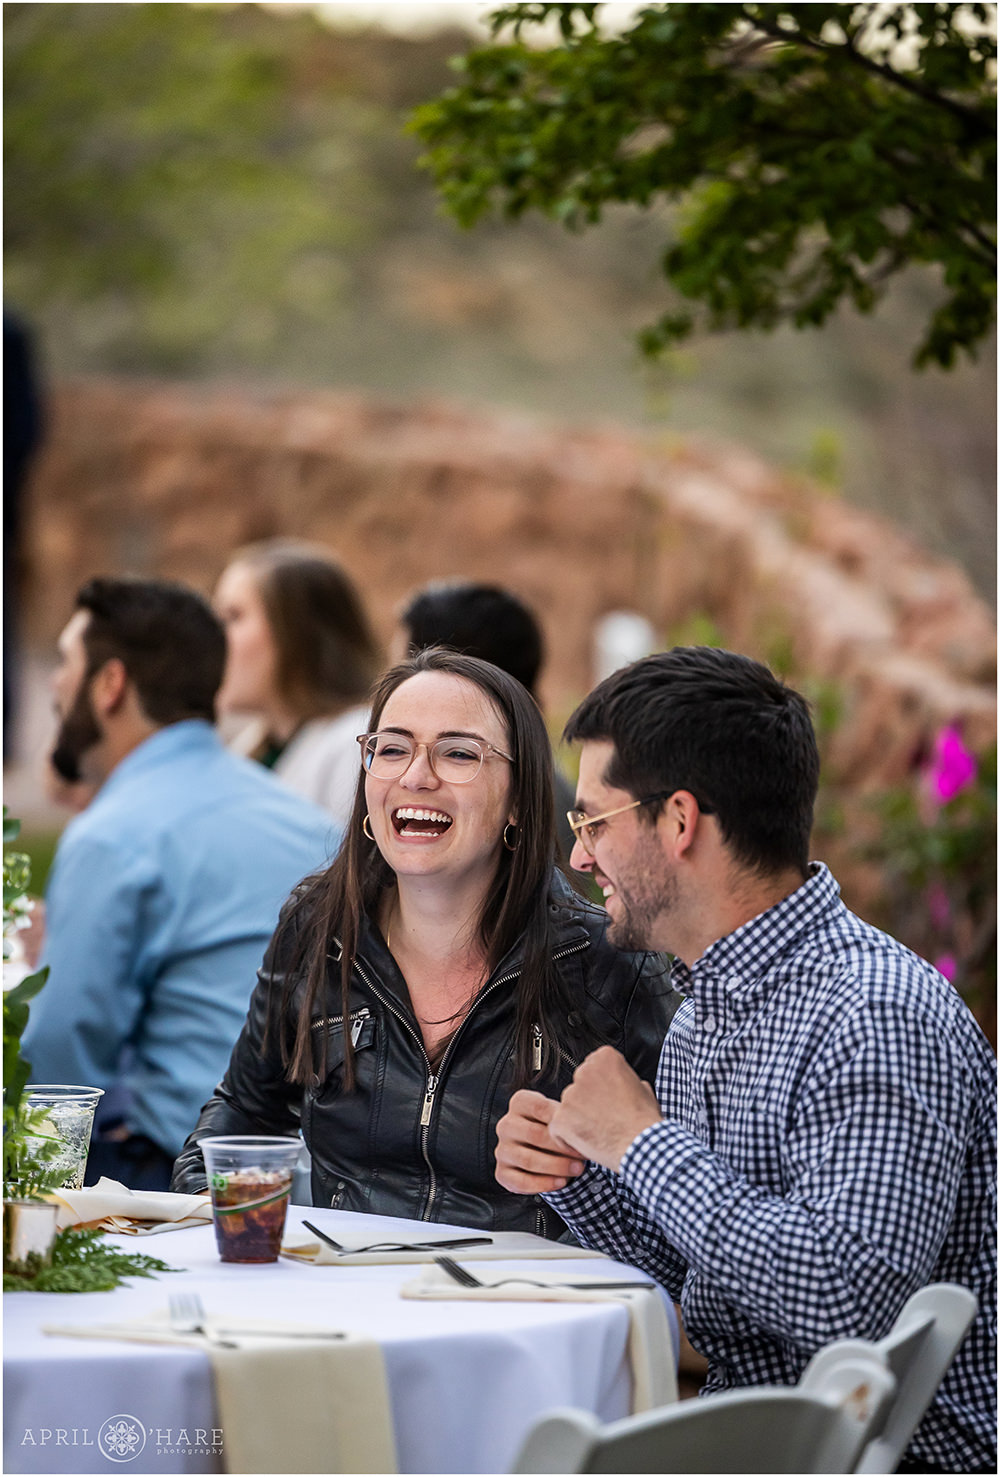 Guests laugh together during dinner at Red Rocks wedding reception in Colorado